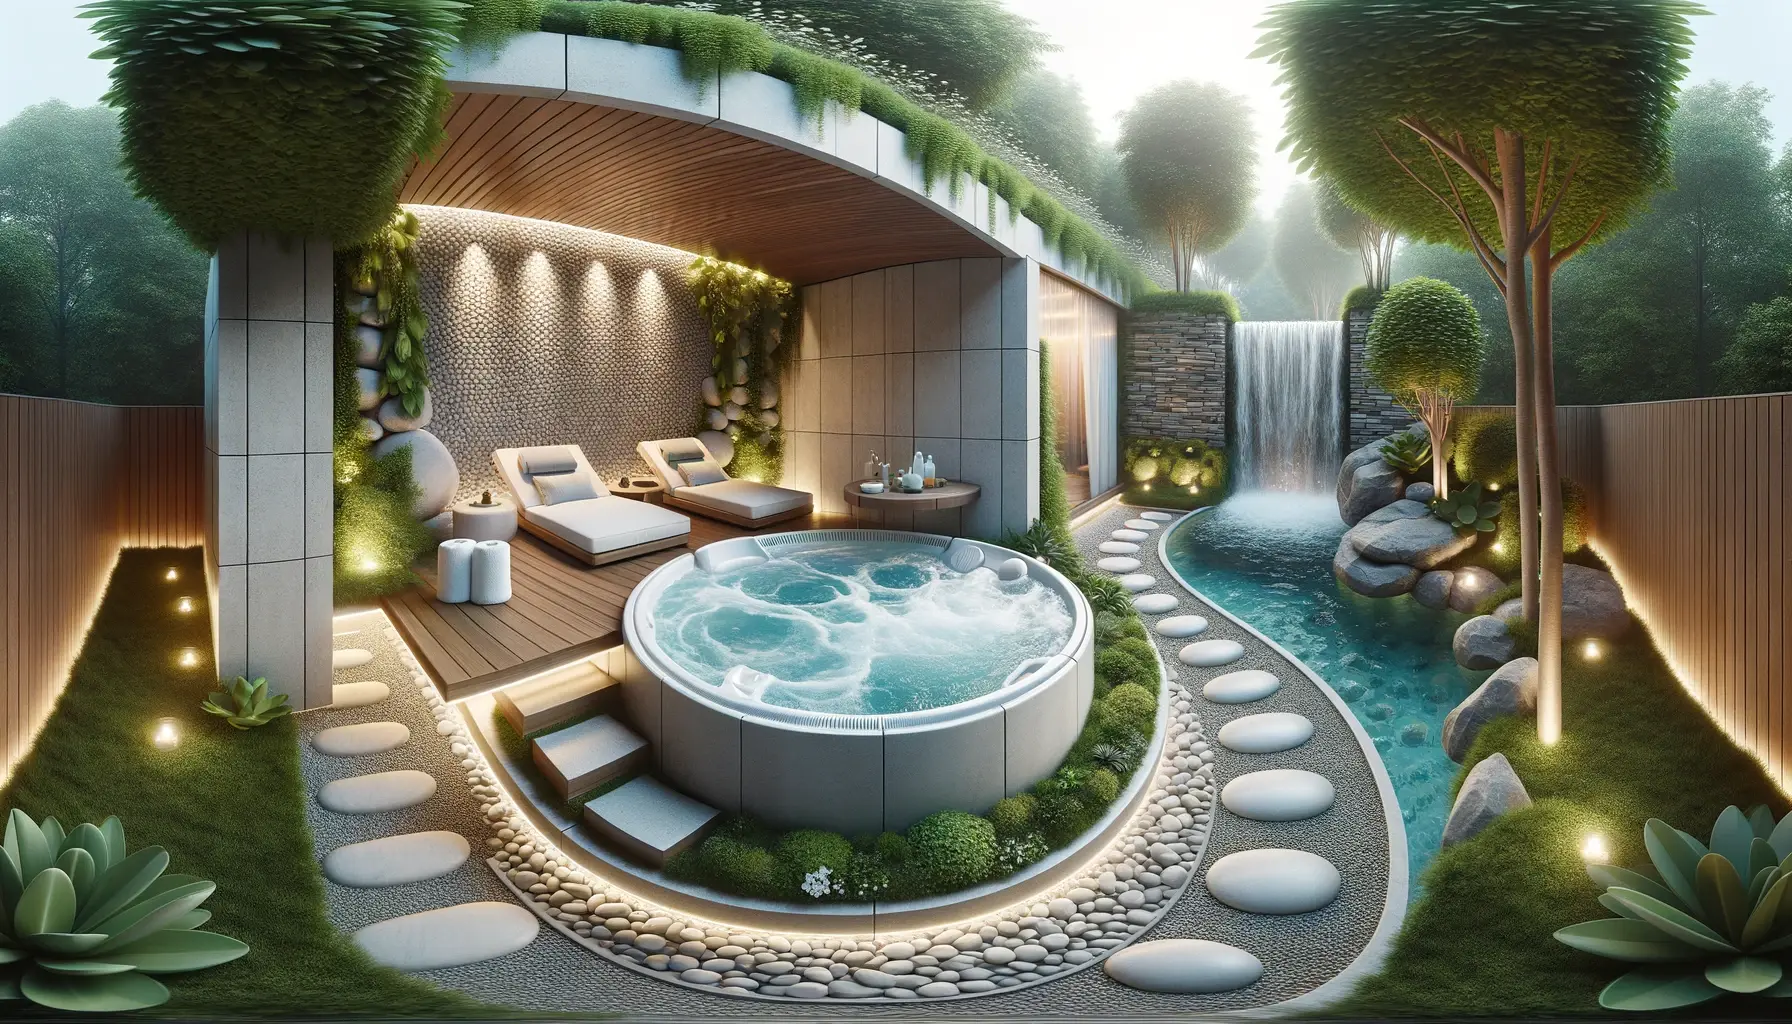 Where Luxury Meets Therapy: The Solid Rock Pools and Spas Touch